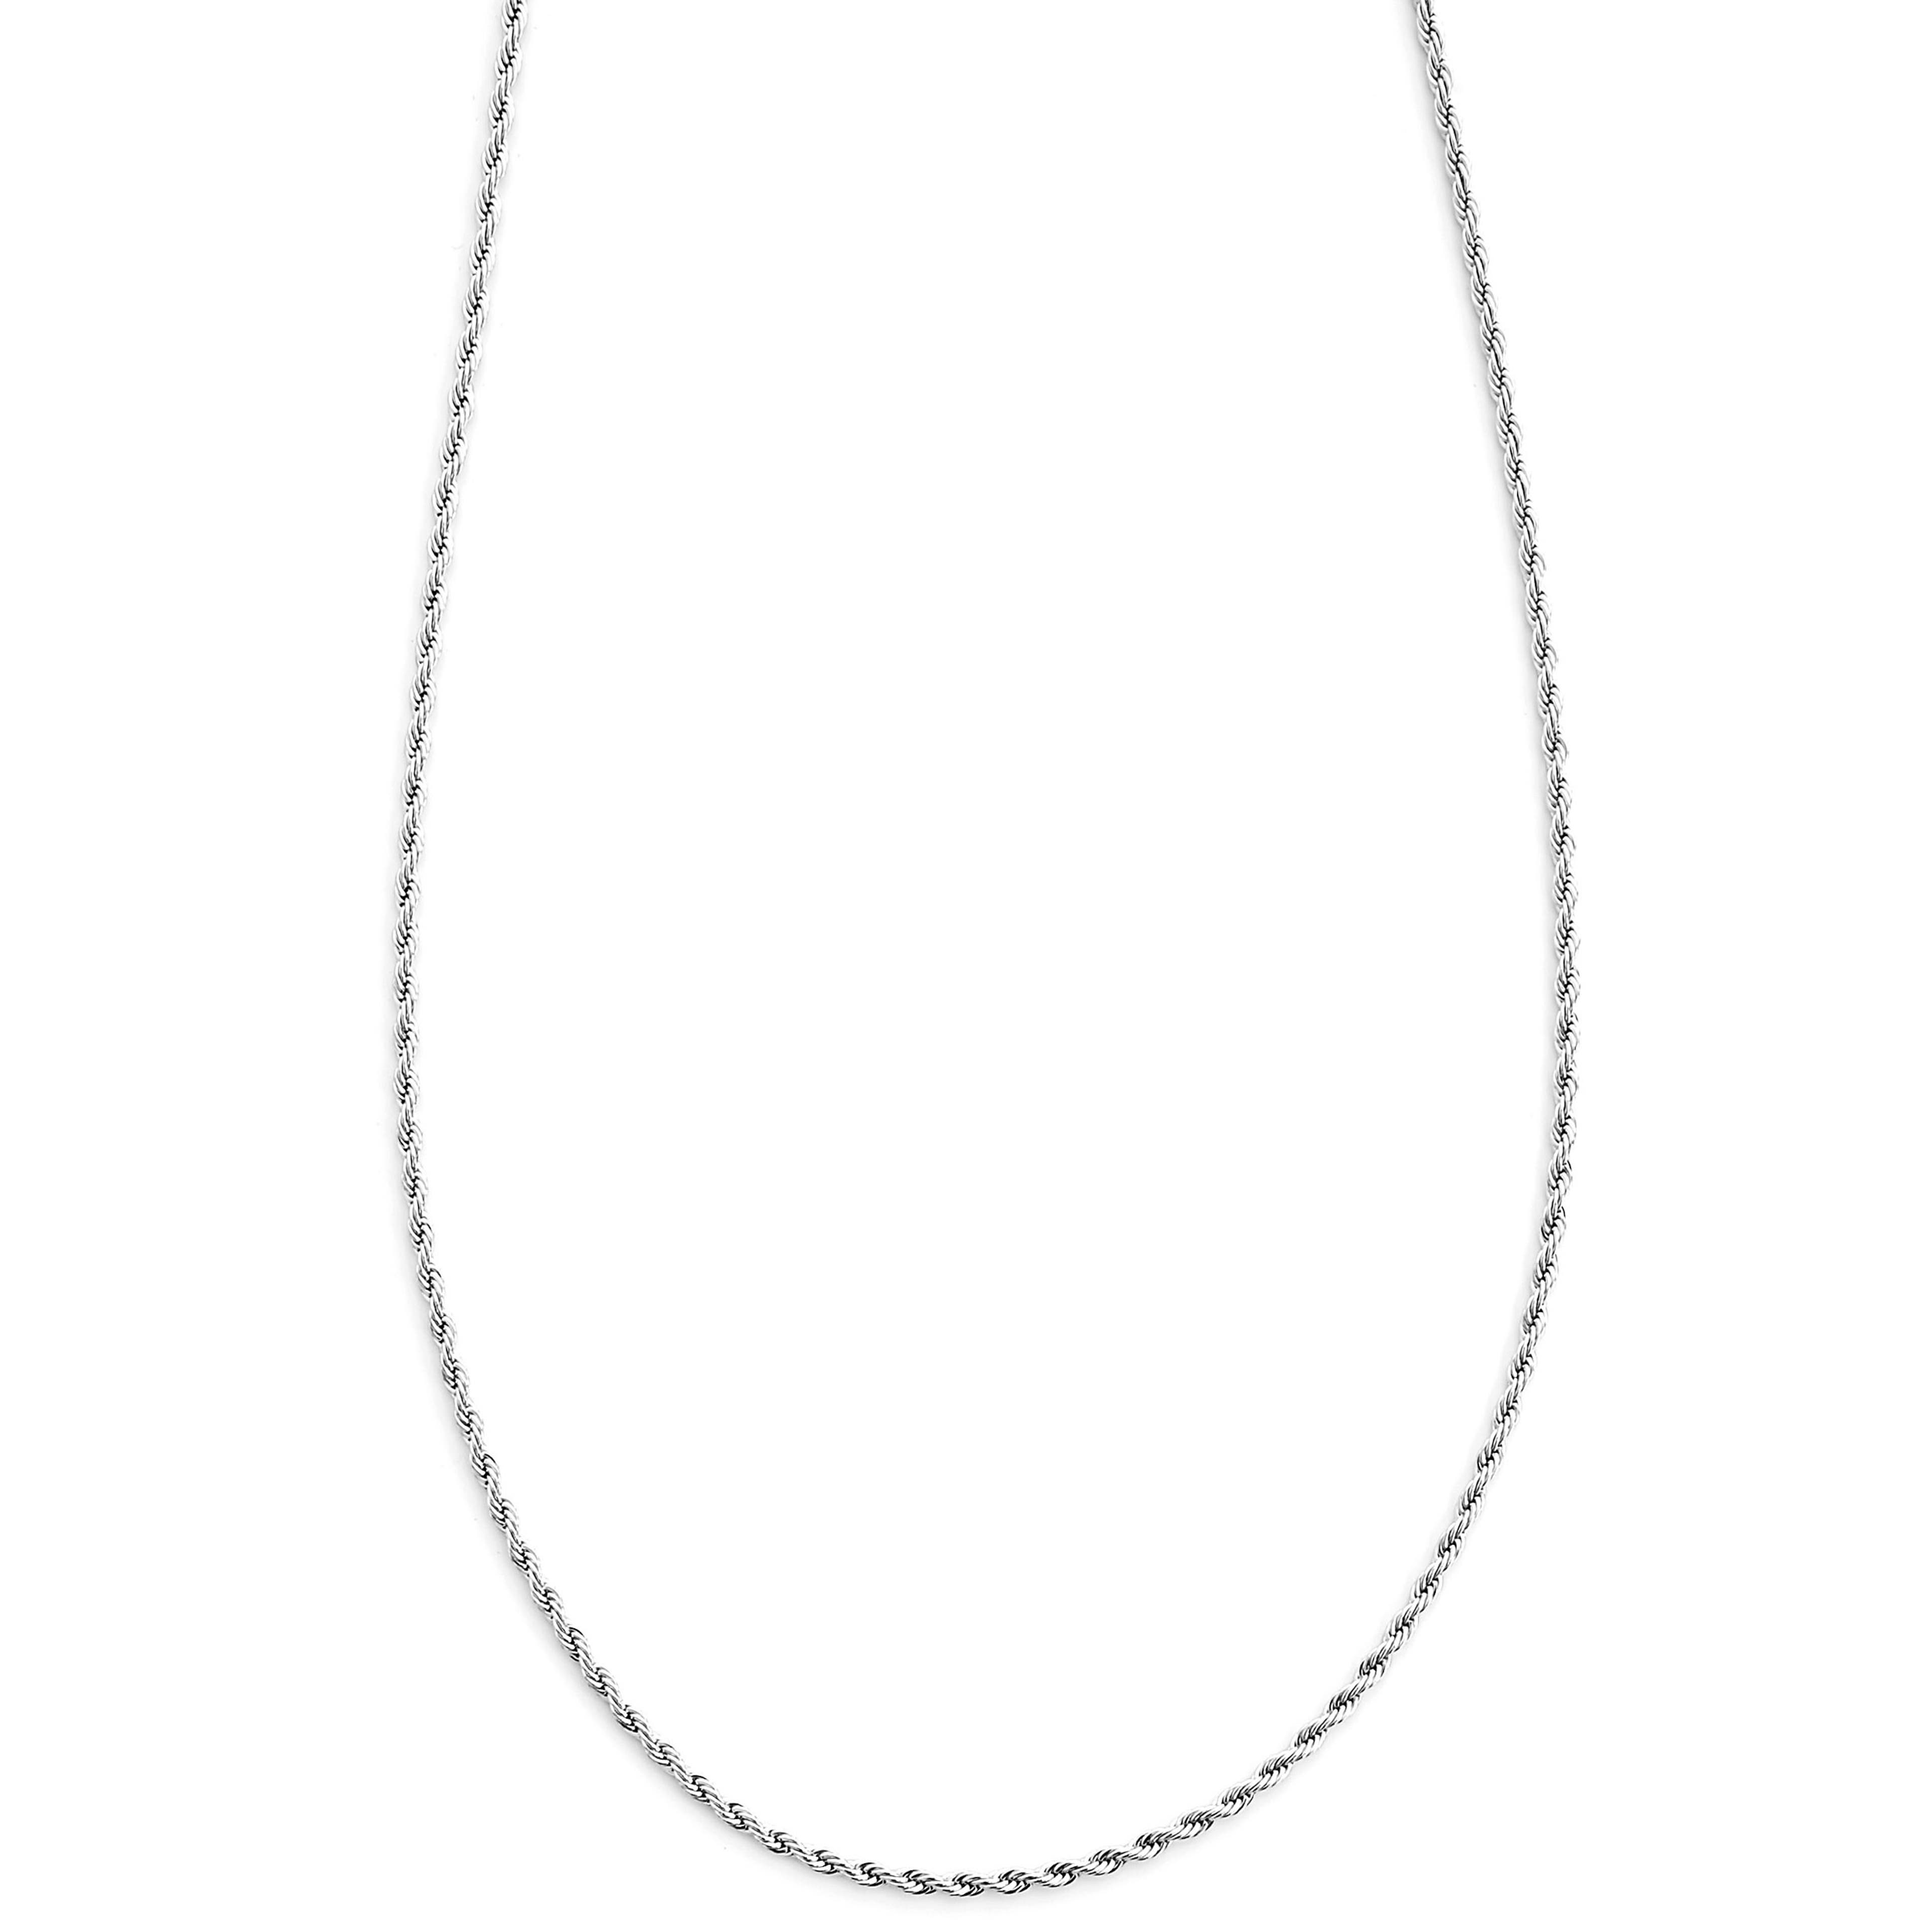 3 mm Silver-Tone Stainless Steel Rope Chain Necklace